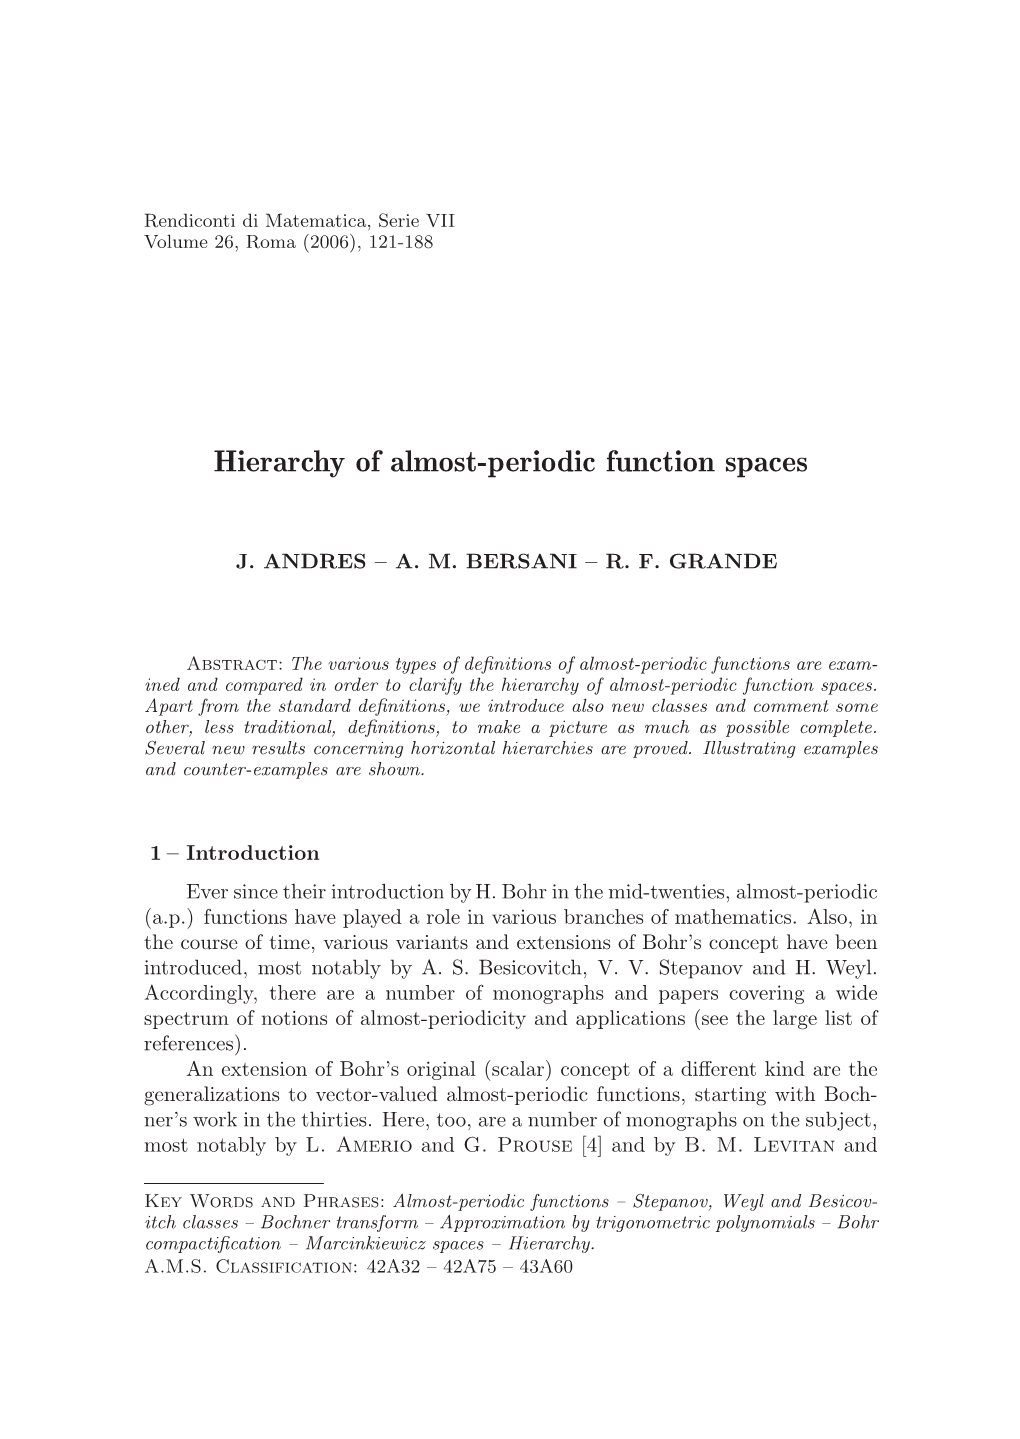 Hierarchy of Almost-Periodic Function Spaces